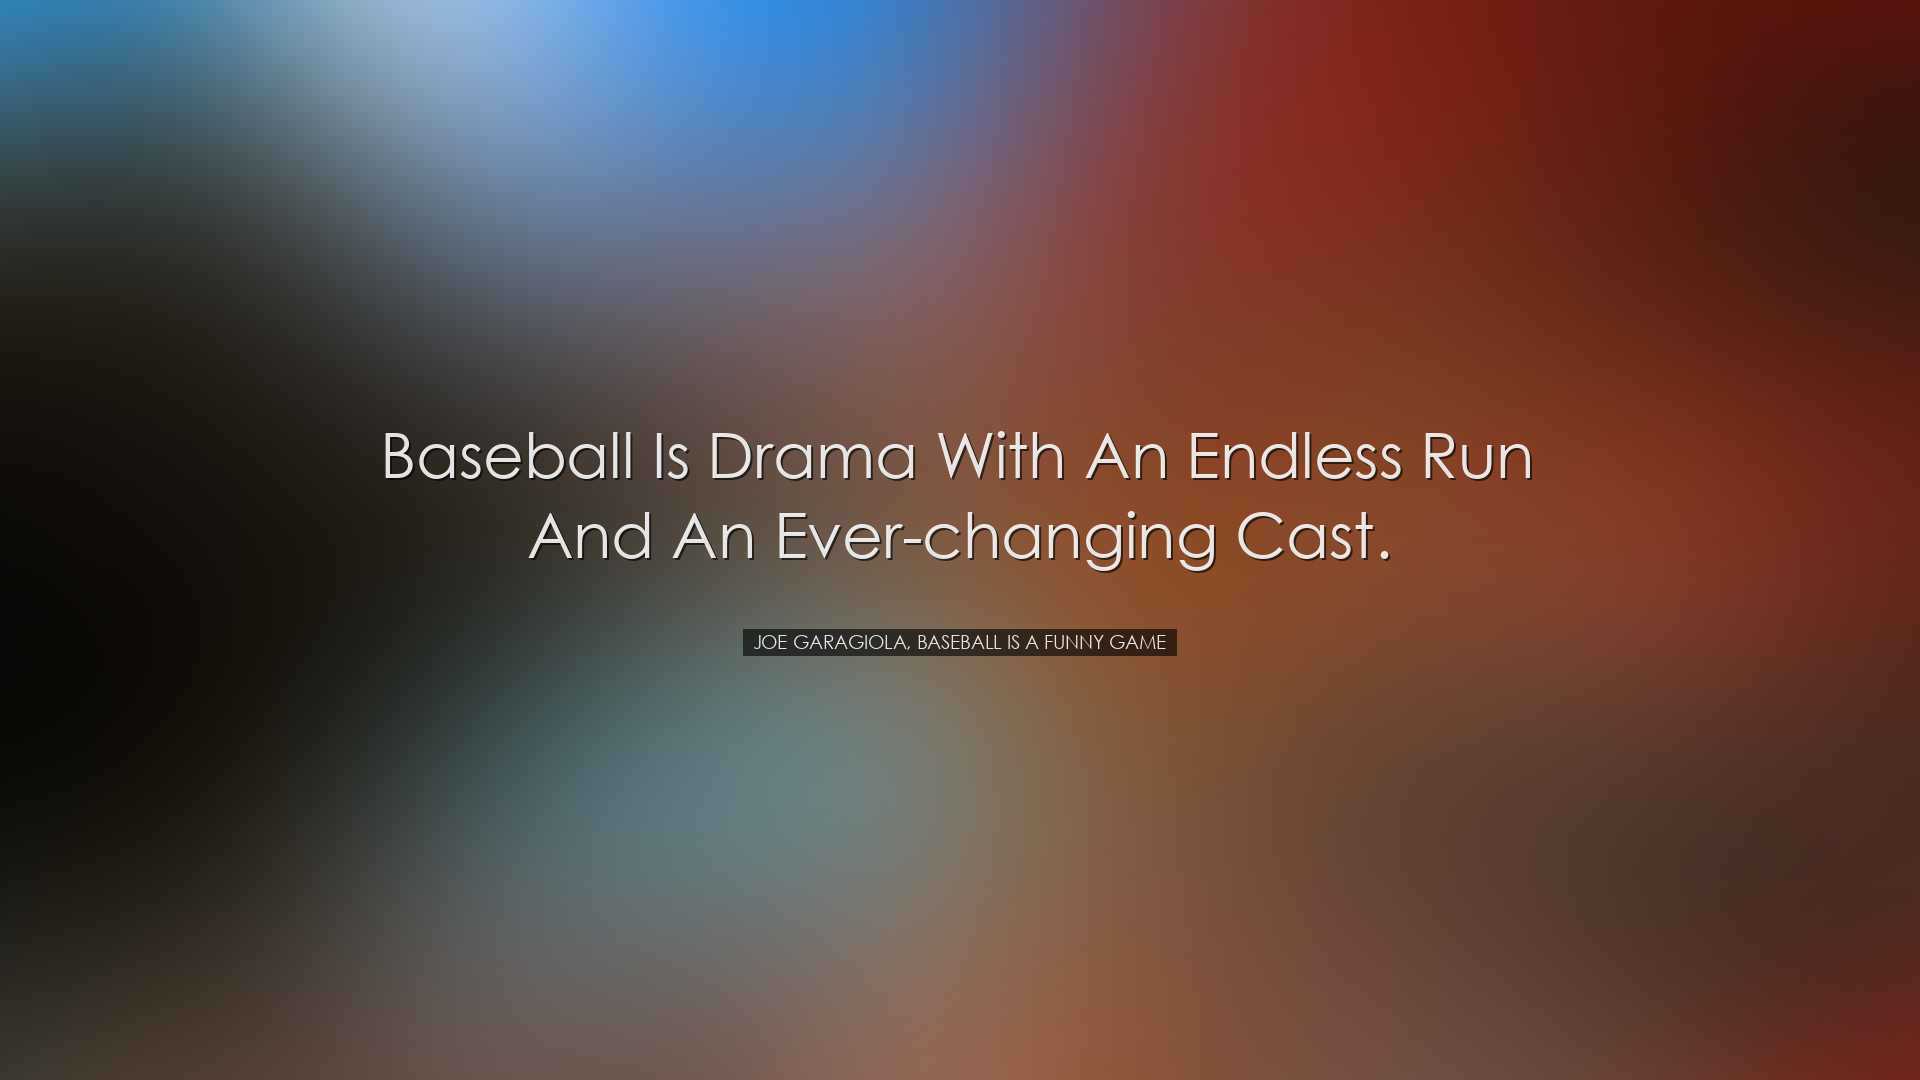 Baseball is drama with an endless run and an ever-changing cast. -